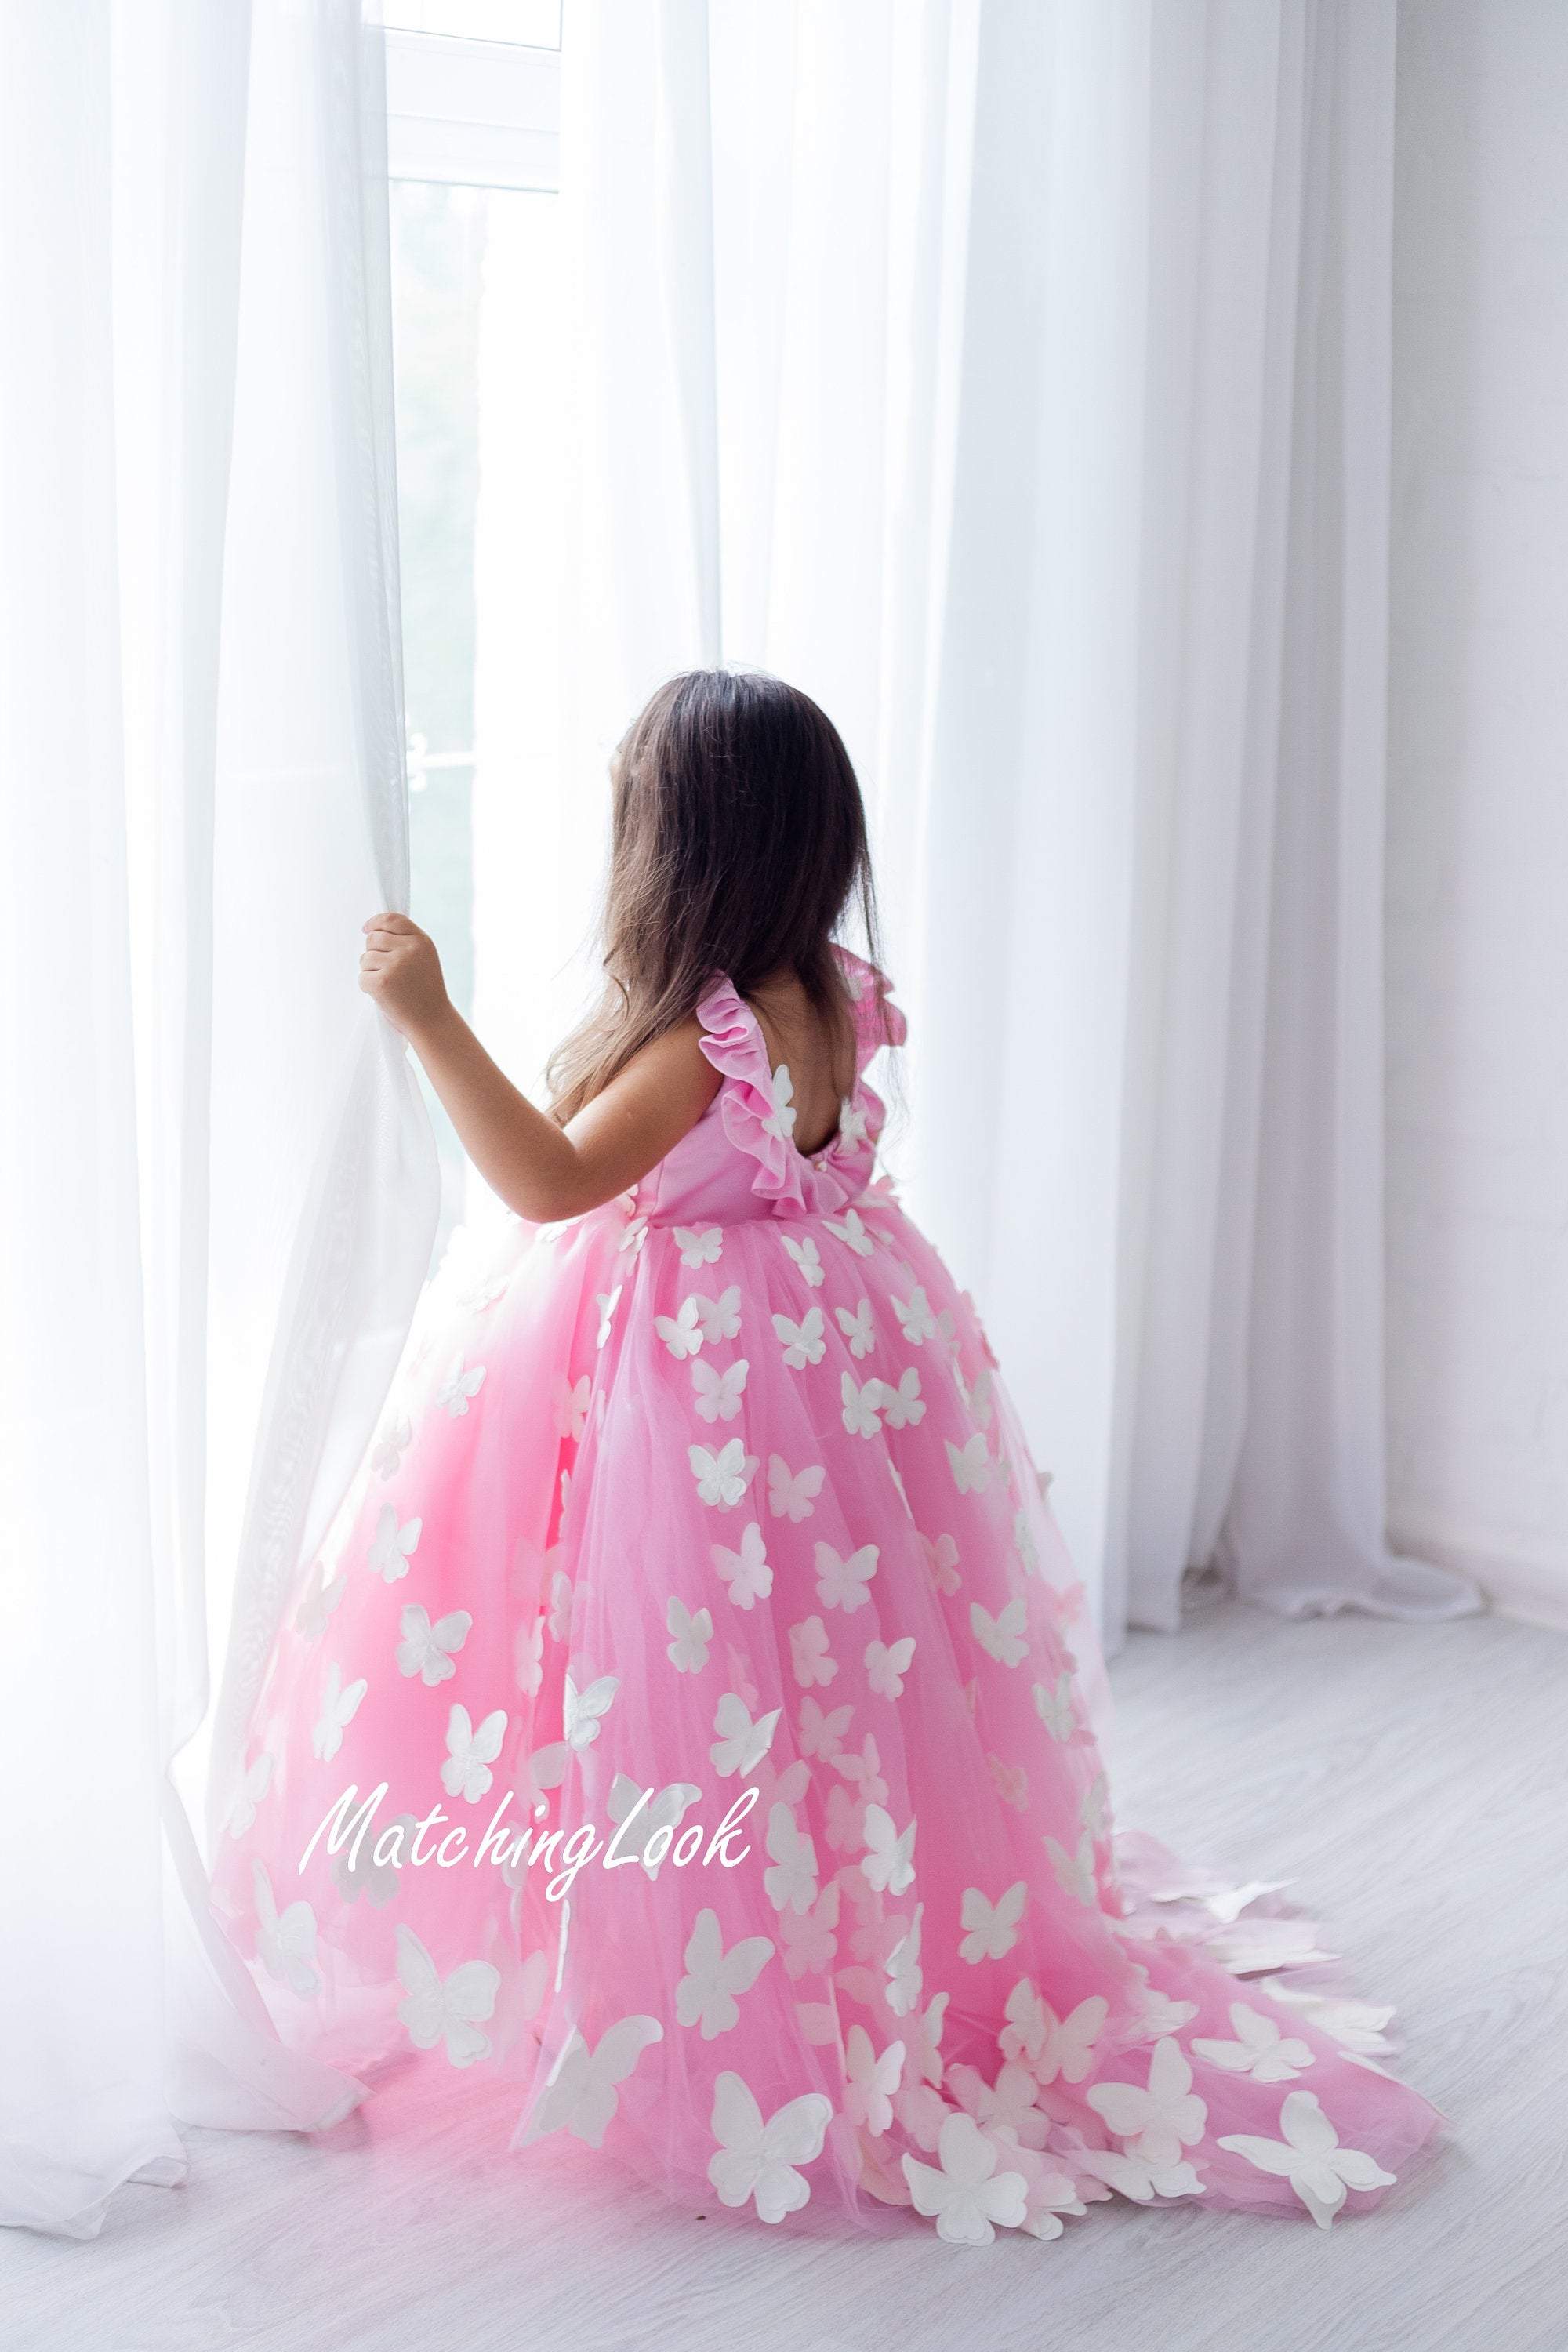 Bling White Princess Princess Evening Gown For Little Girls Perfect For  Weddings, First Holy Communion, Birthdays, Pageants And Special Occasions  From Weddingpromgirl, $82.8 | DHgate.Com